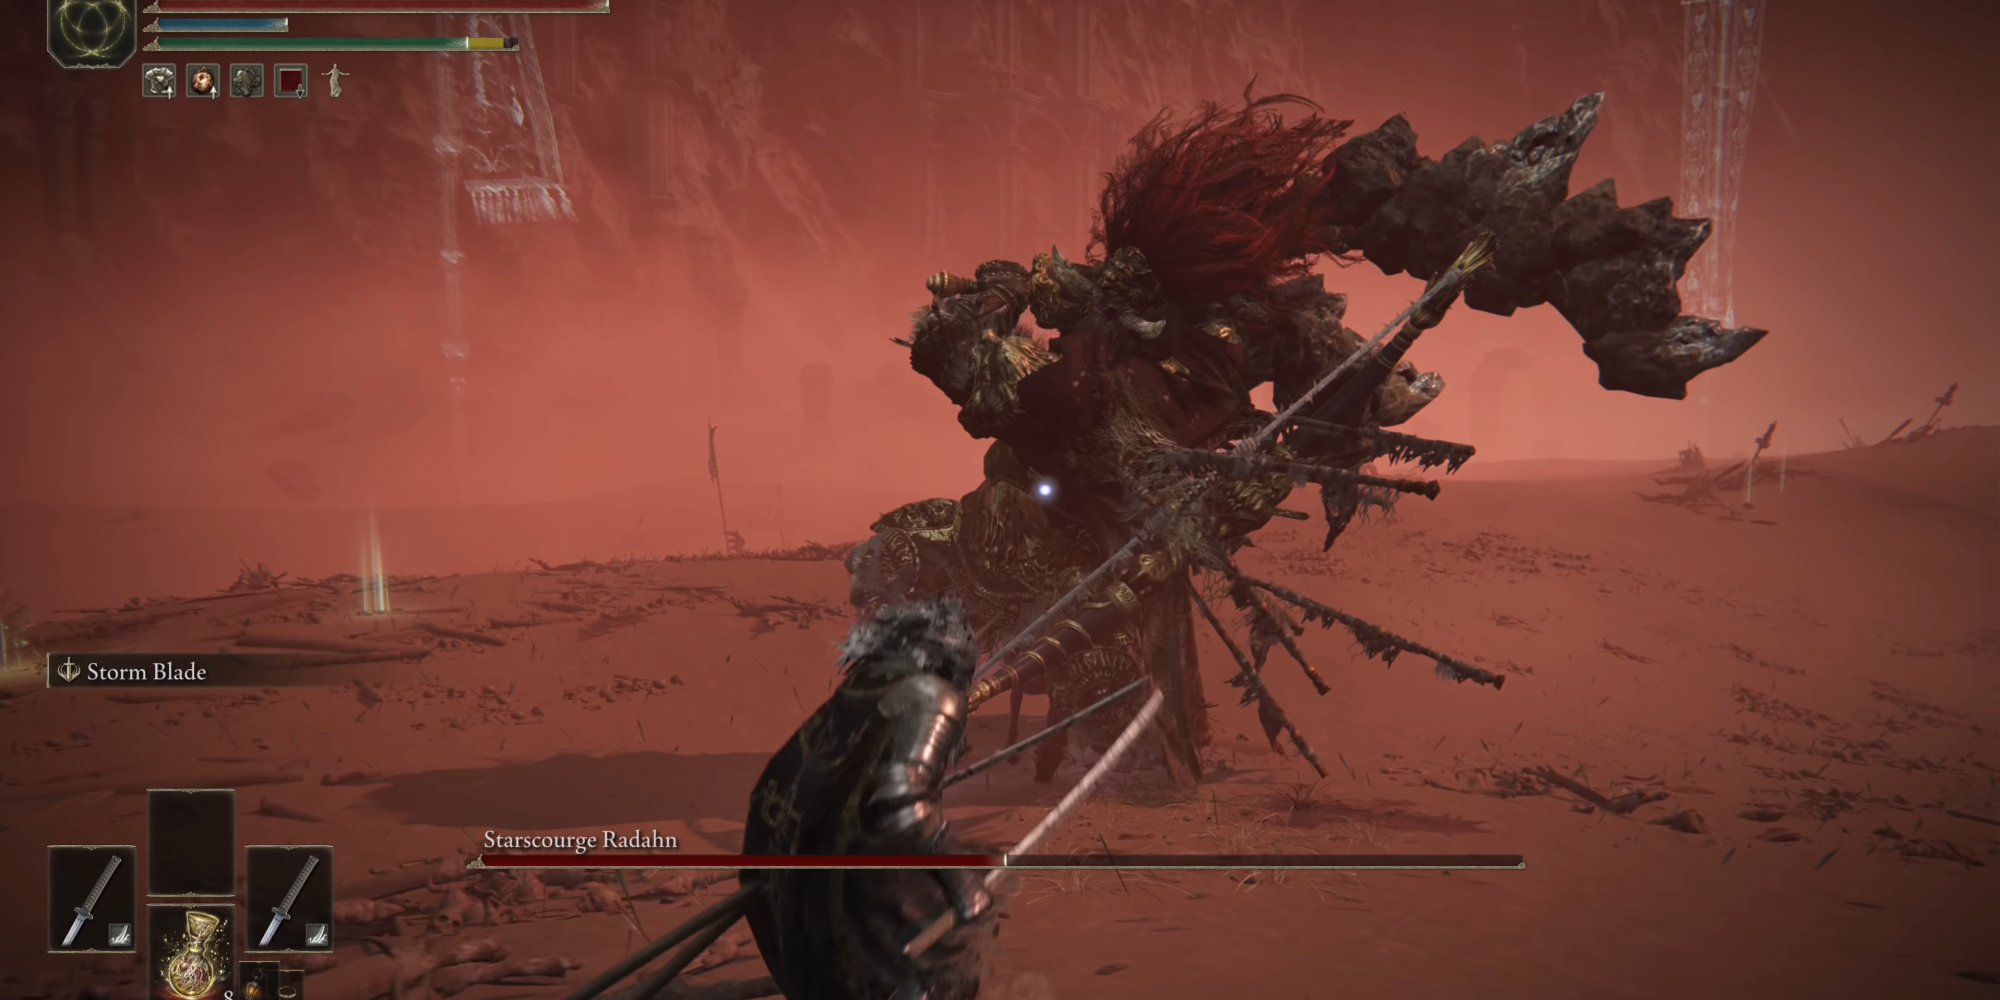 This image shows Starscourge Radahn using his spinning slash attack in Elden Ring.